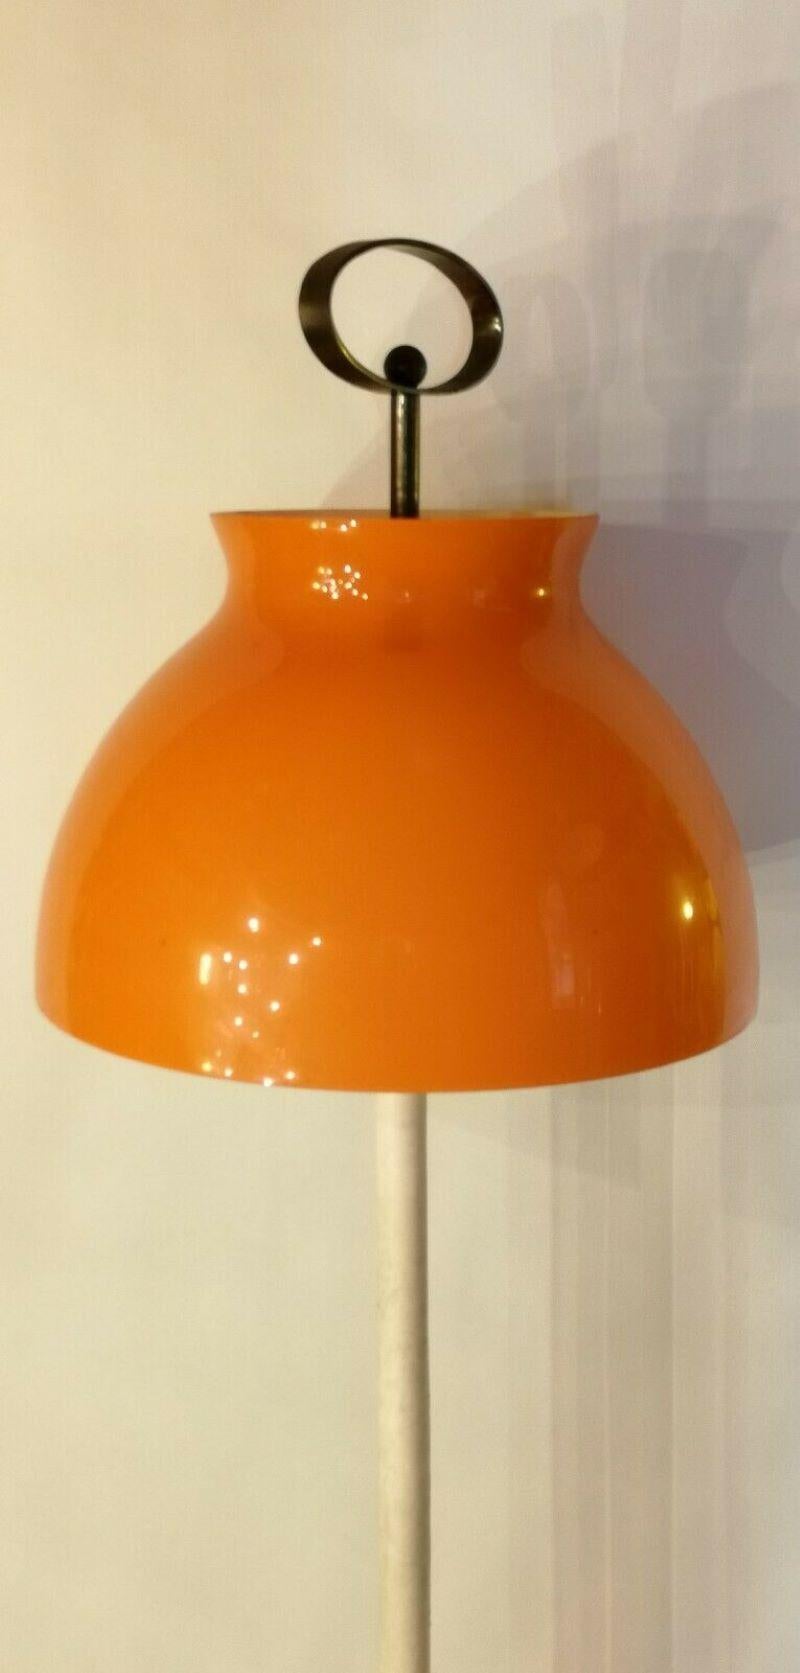 original floor lamp from the 1950s, probably stilnovo production

supporting structure in metal covered in white eco-leather, base in white carrara marble and diffuser in bright orange bell-shaped blown Murano glass

Very good condition, as